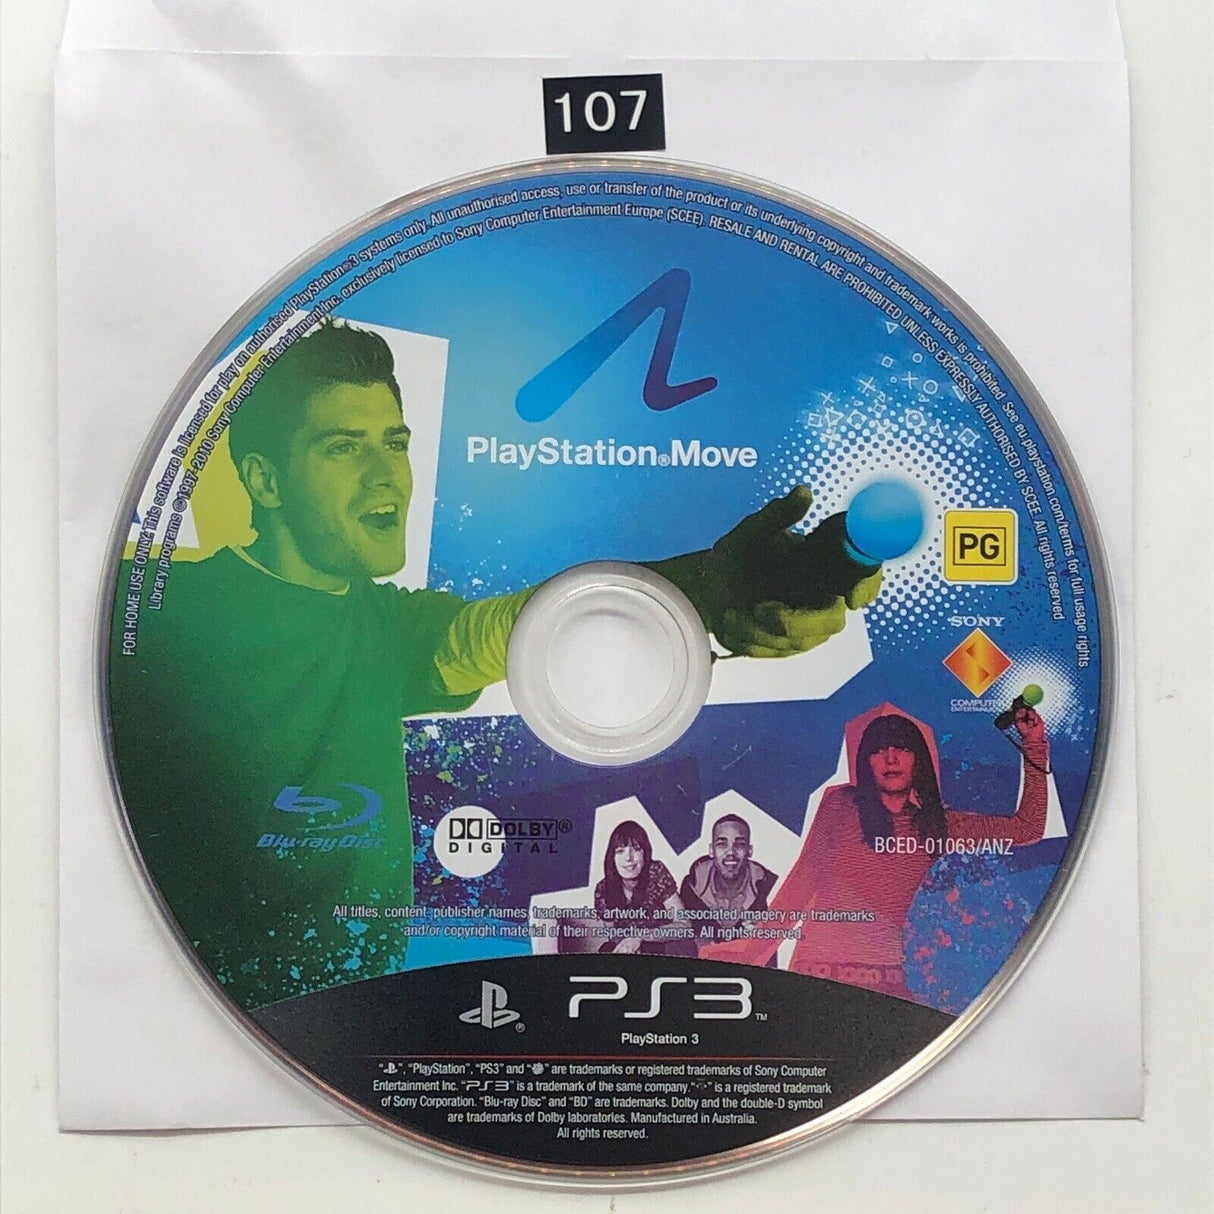 Playstation Move PS3 Playstation 3 Game Disc Only oz107